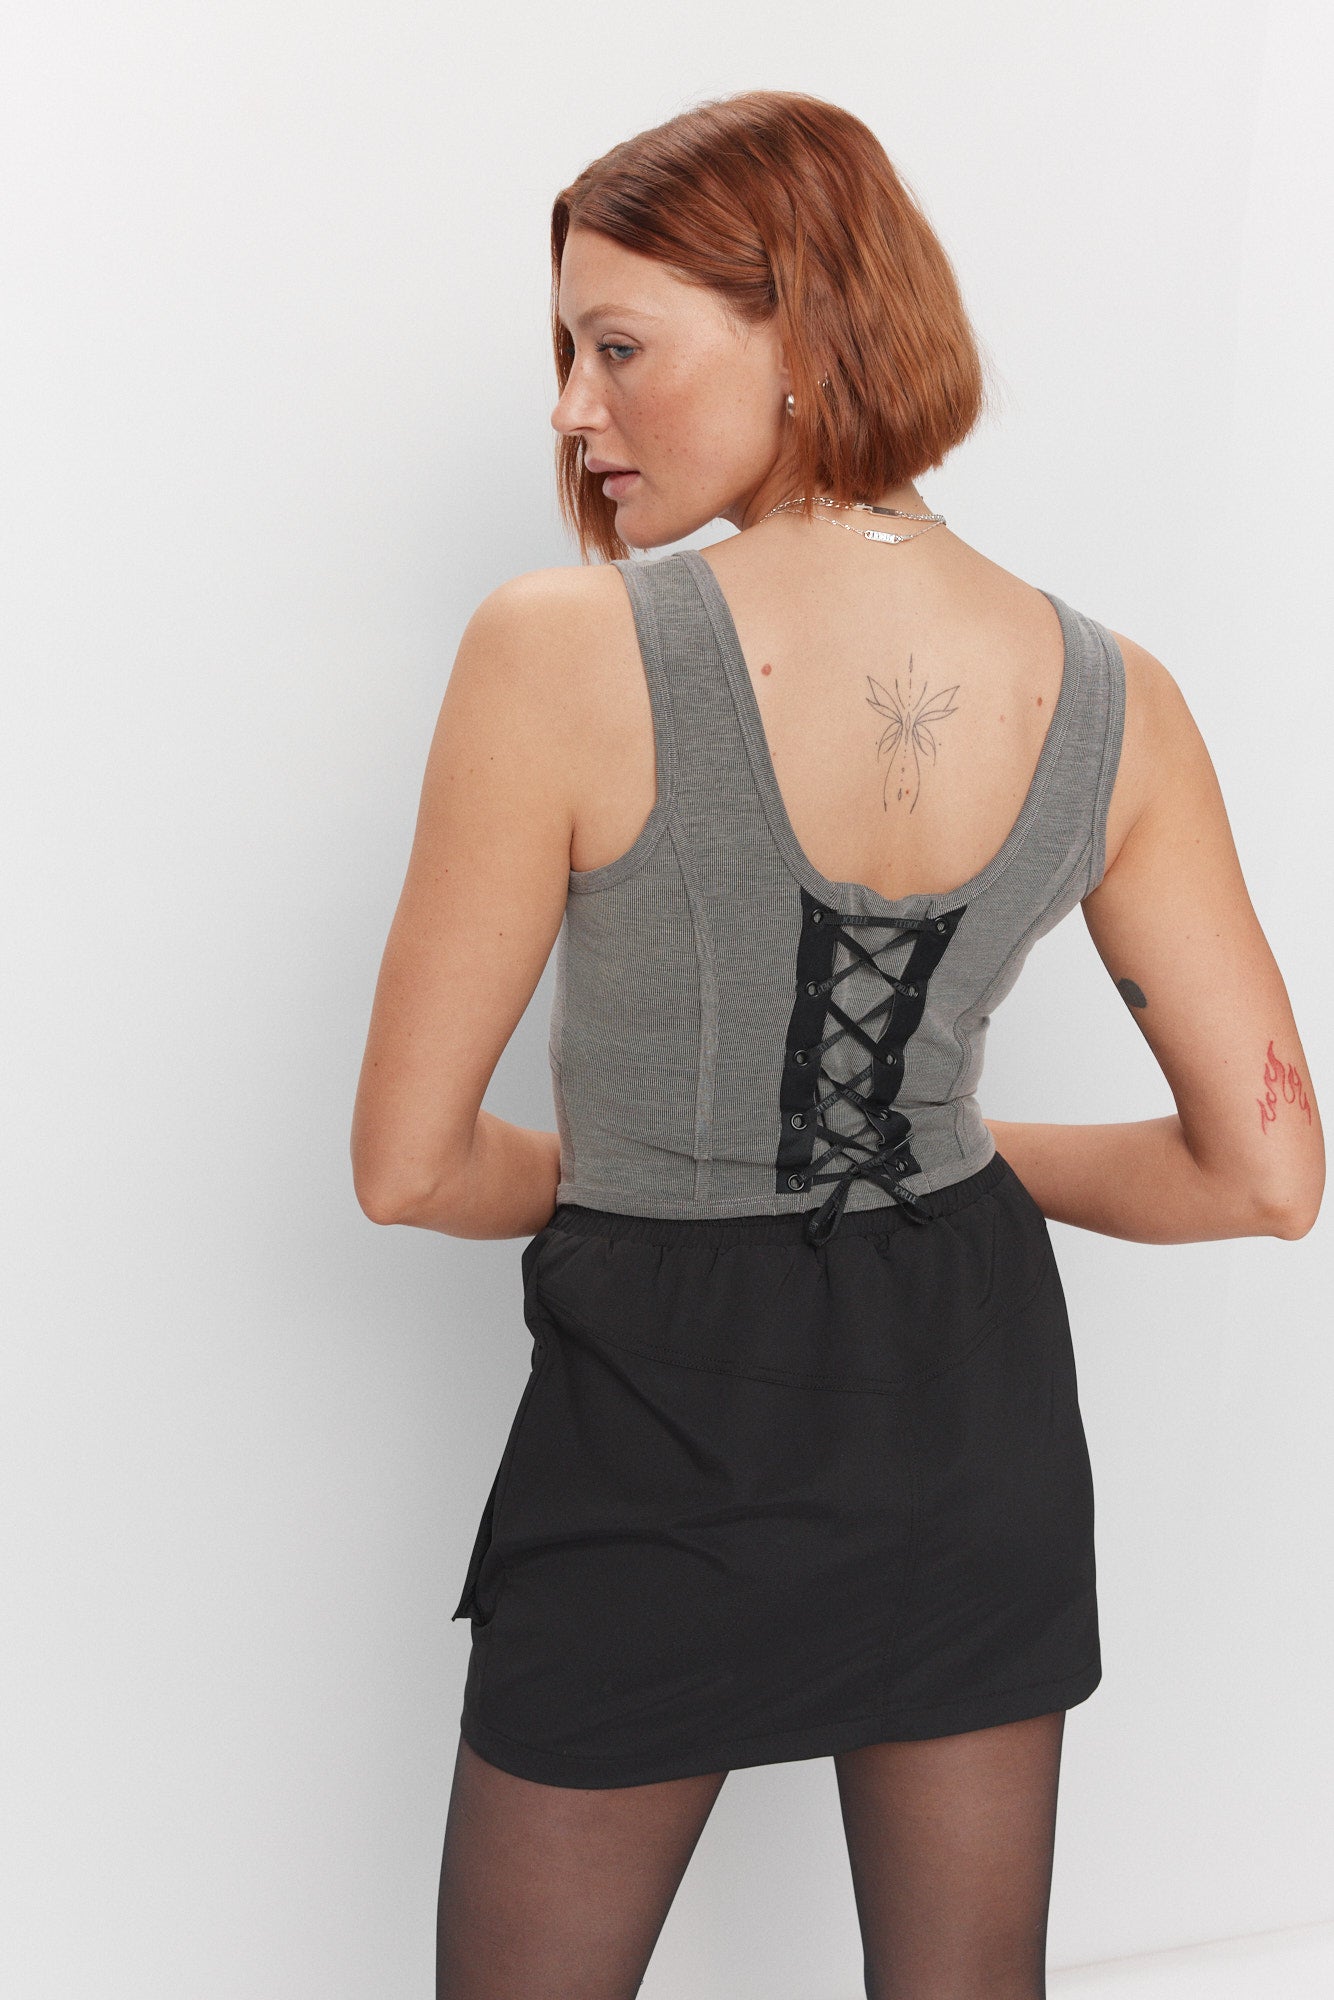 White and black corset camisole | Lawan